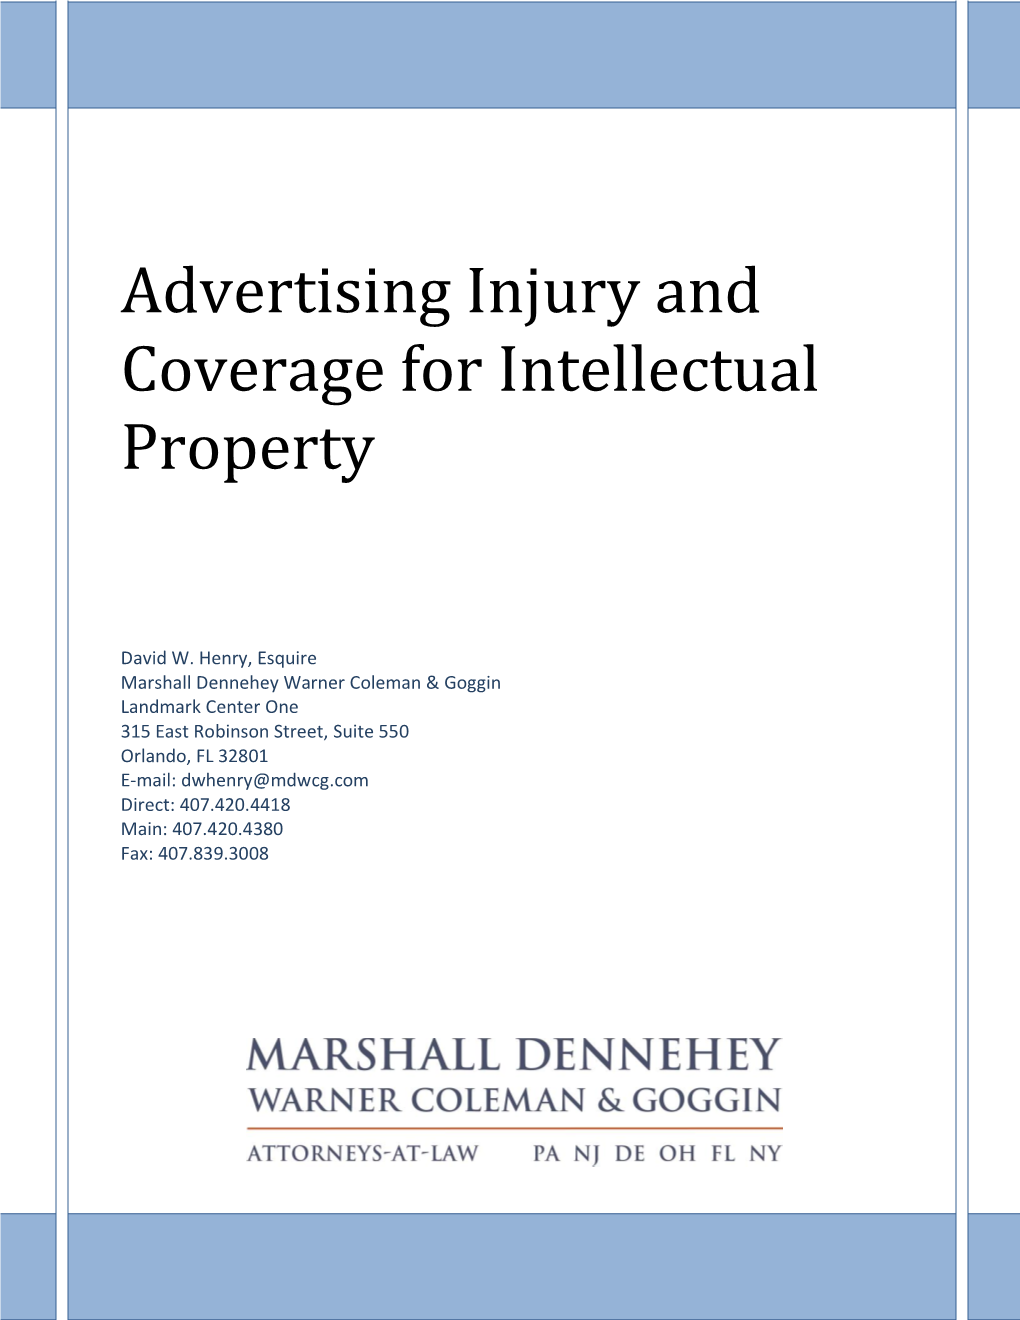 Advertising Injury and Coverage for Intellectual Property